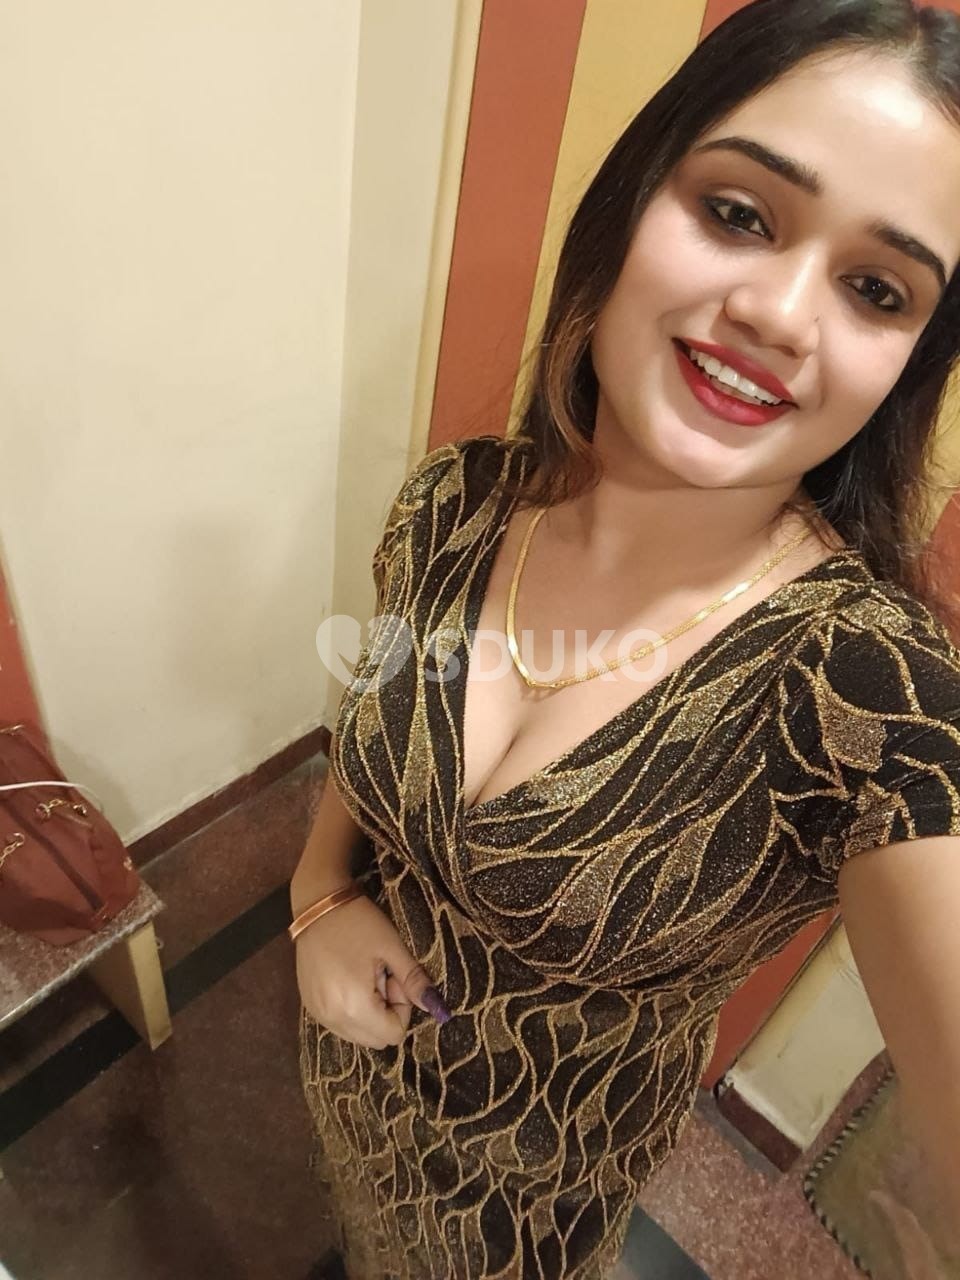 Bharuch City best call girl service available 24 hours full safe and secure